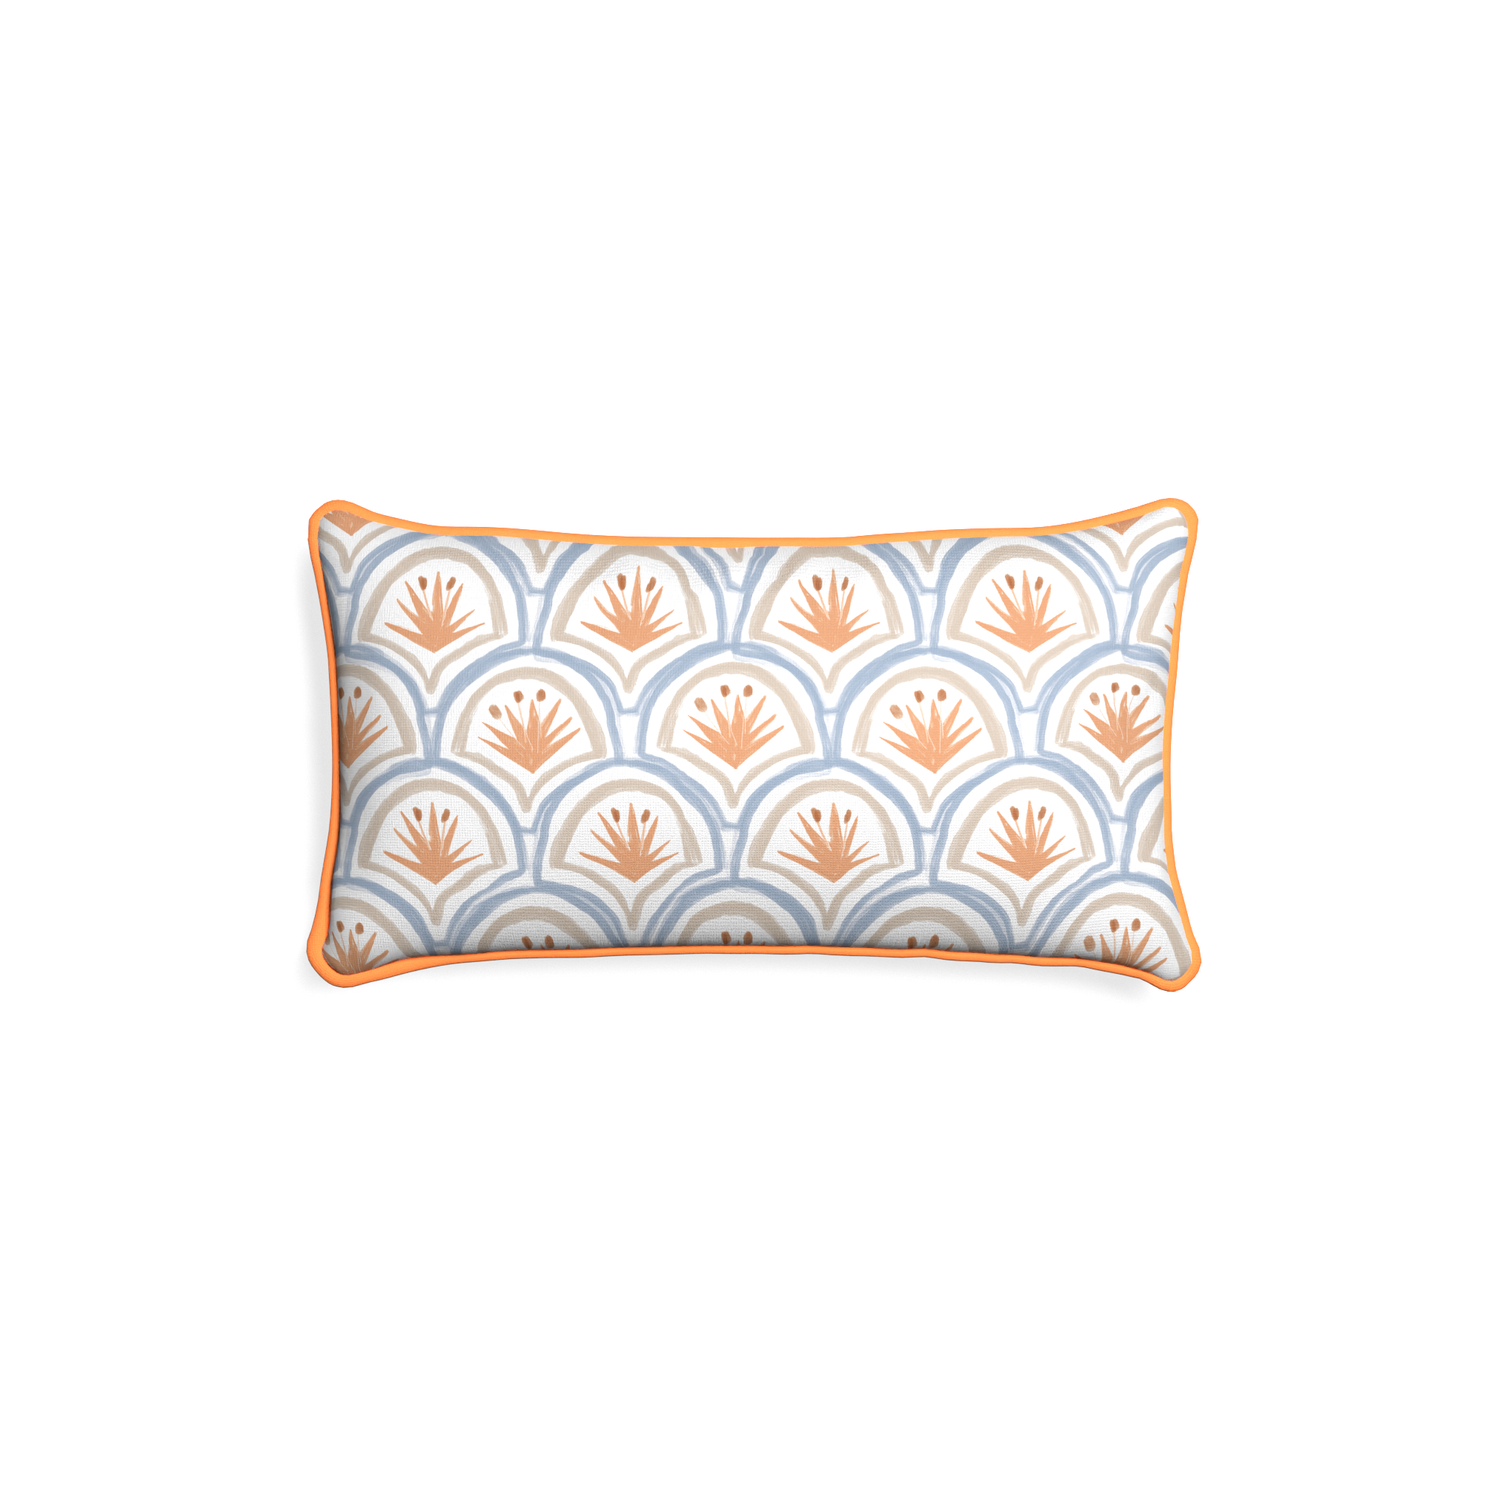 Petite-lumbar thatcher apricot custom art deco palm patternpillow with clementine piping on white background